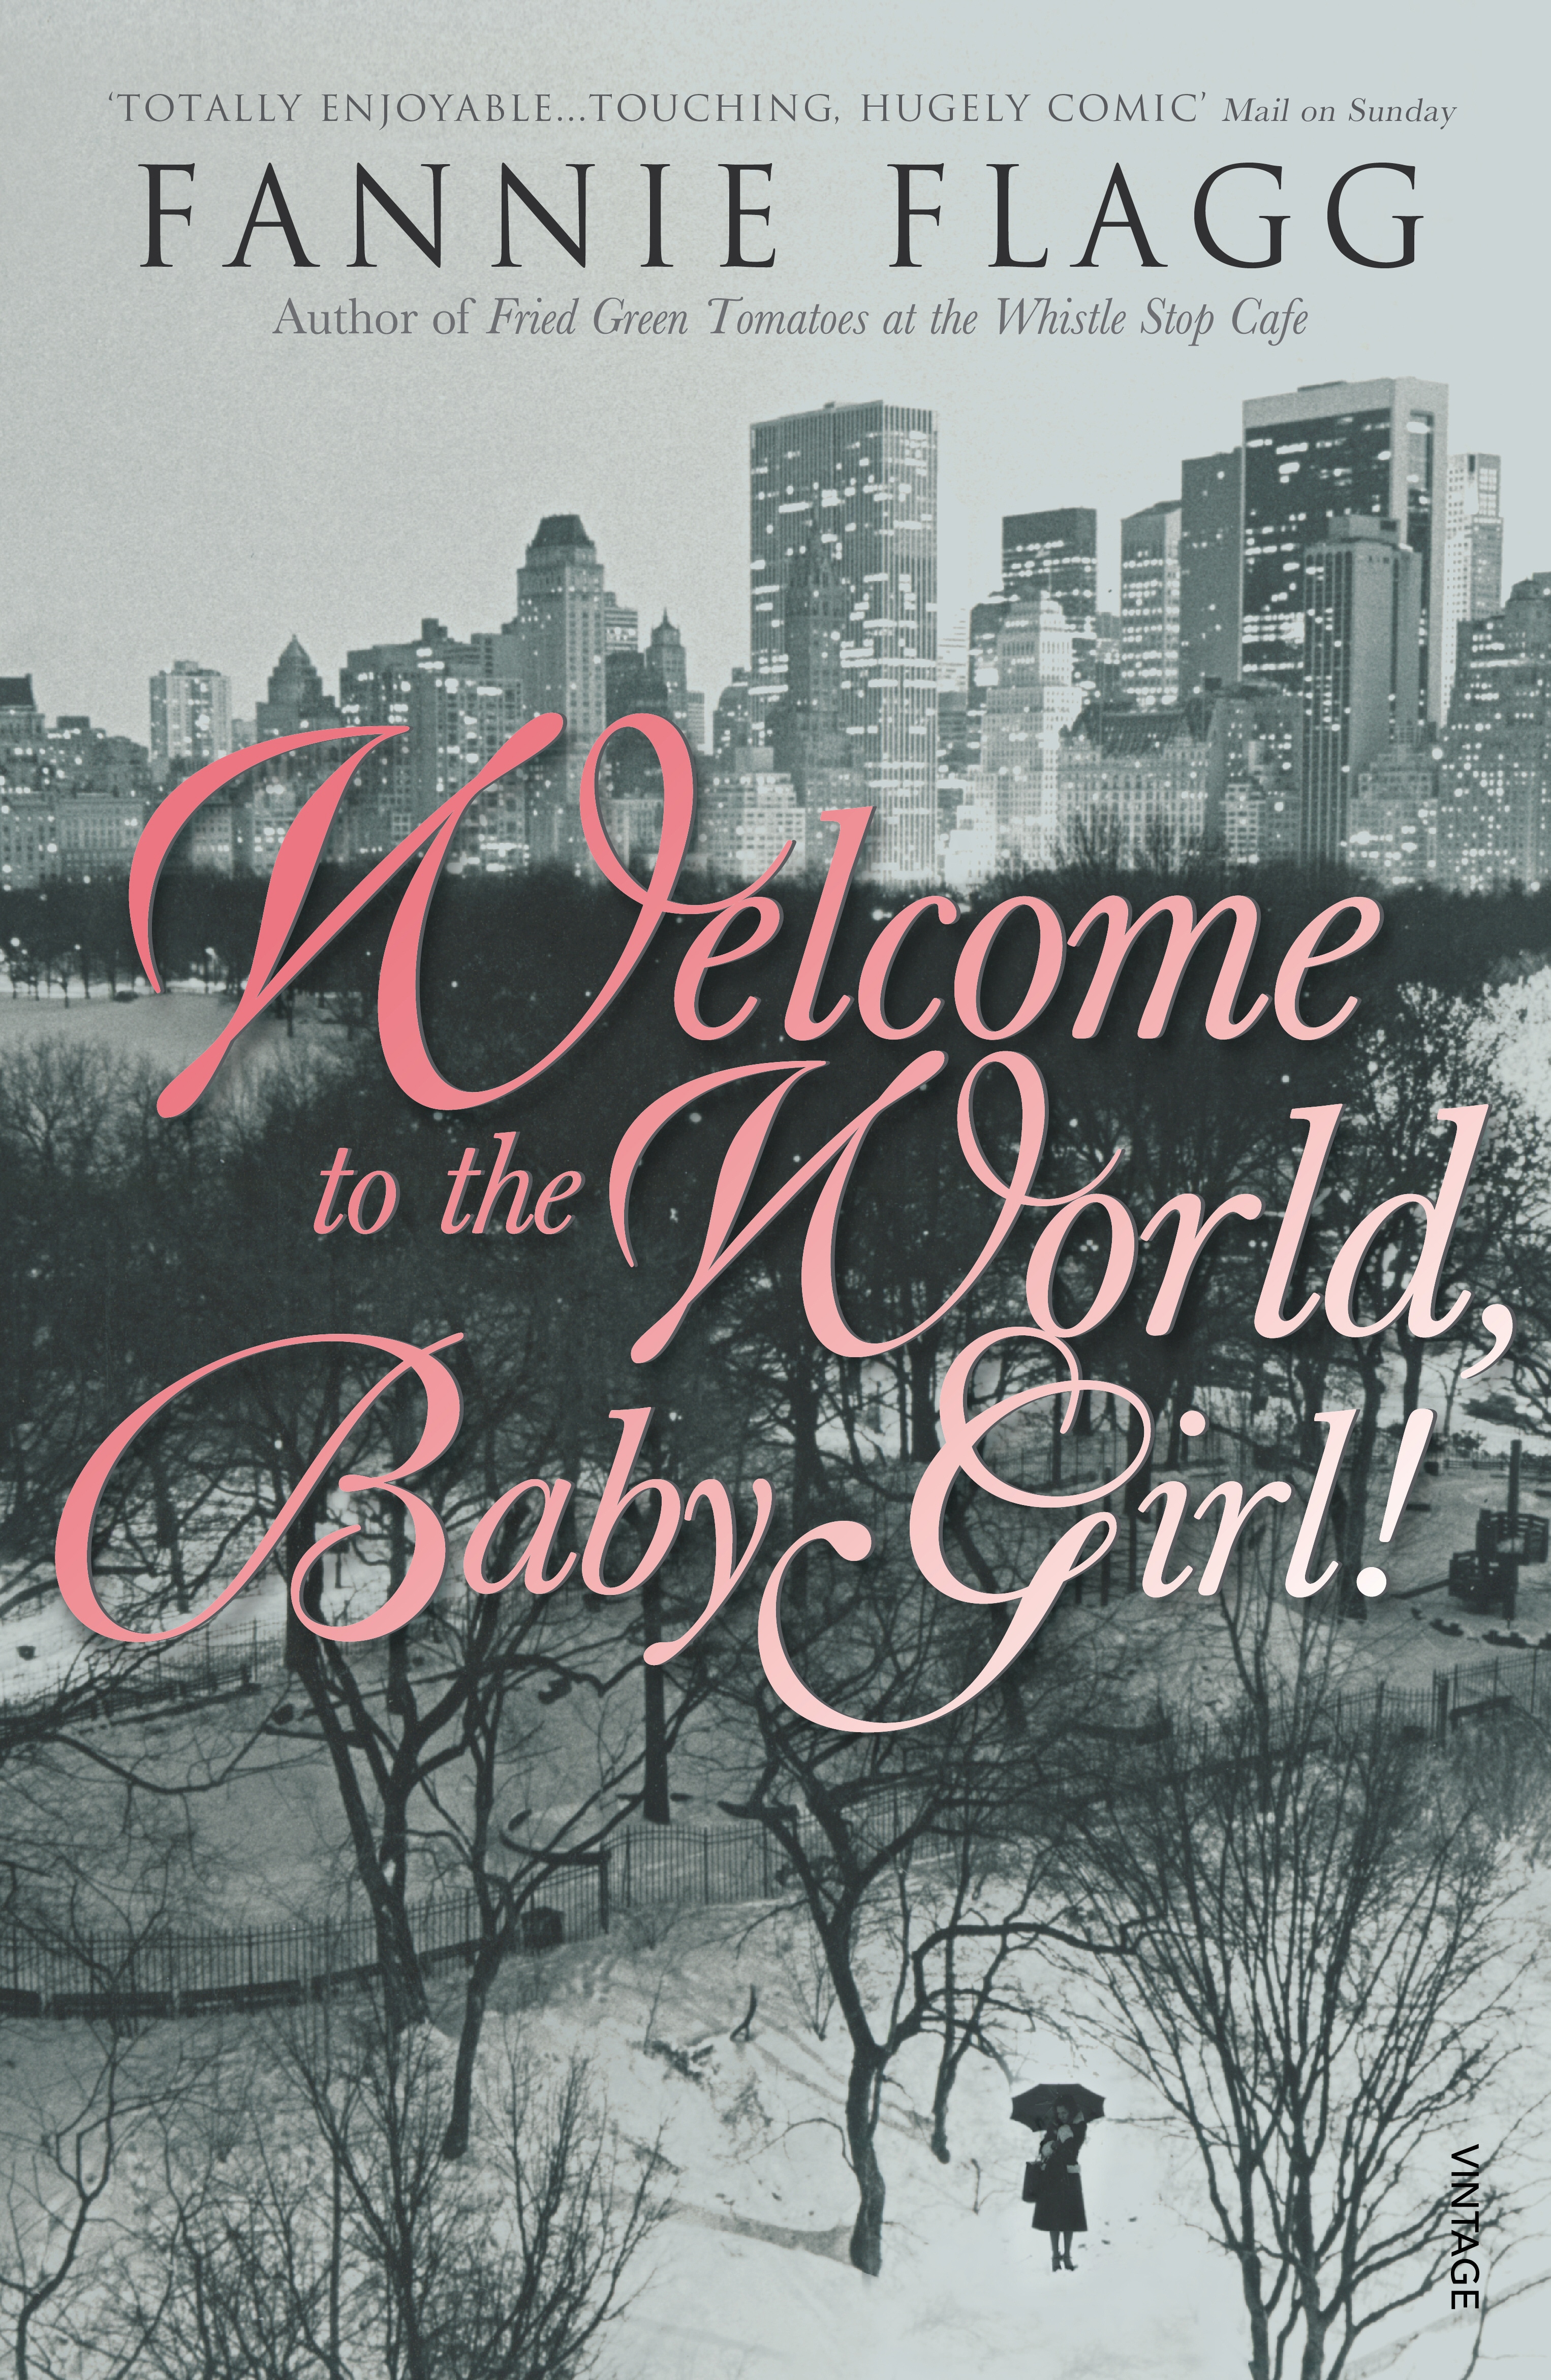 Book “Welcome To The World Baby Girl” by Fannie Flagg — July 1, 1999